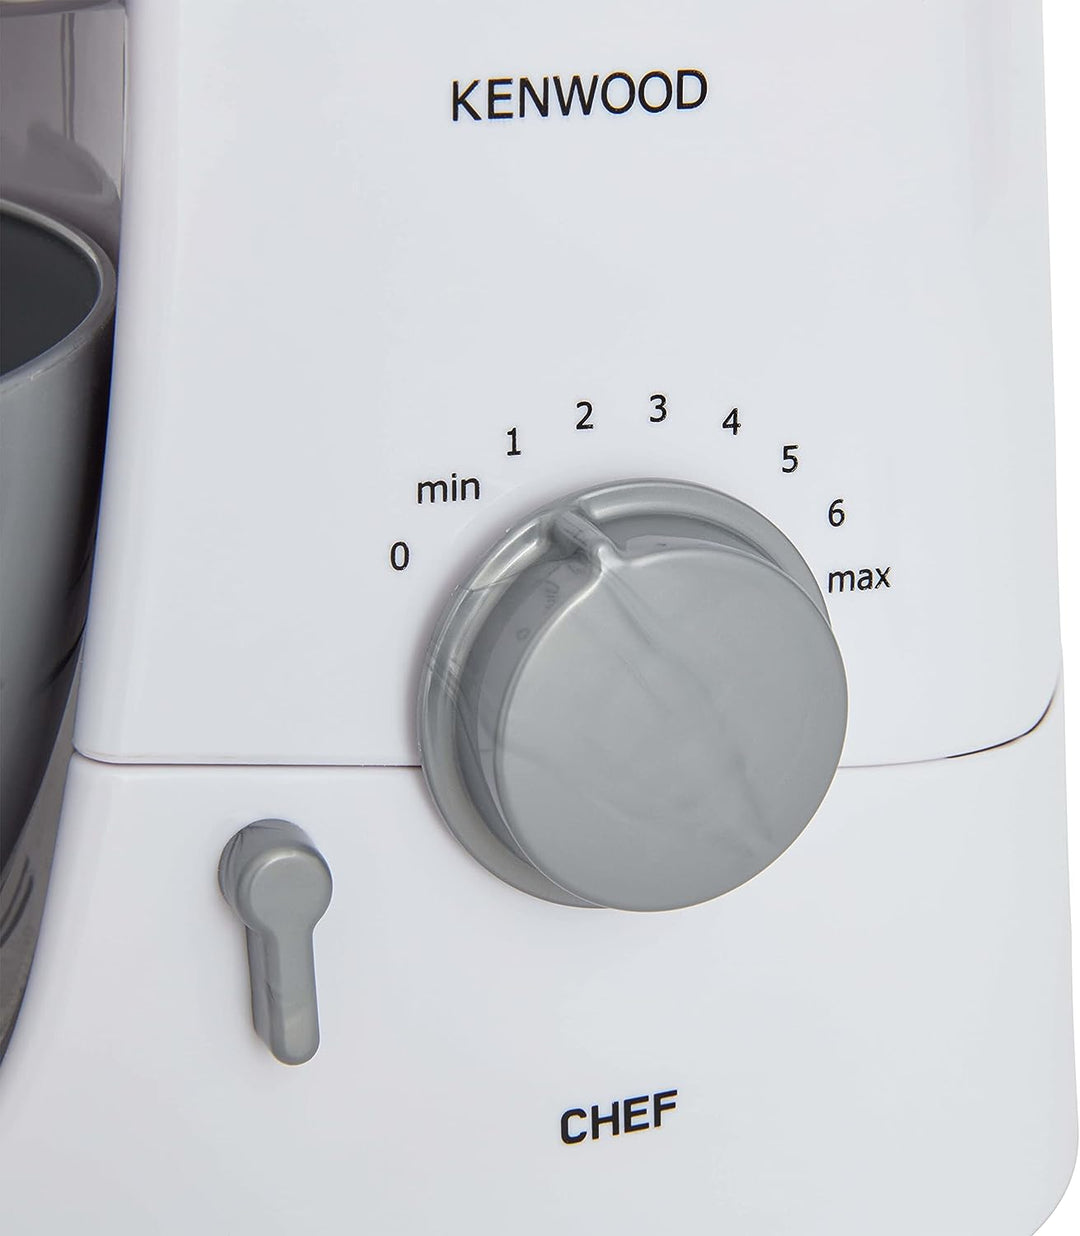 Casdon 63550 Kenwood Toy Mixer for Children Aged 3+ | Perfect for Budding Bakers